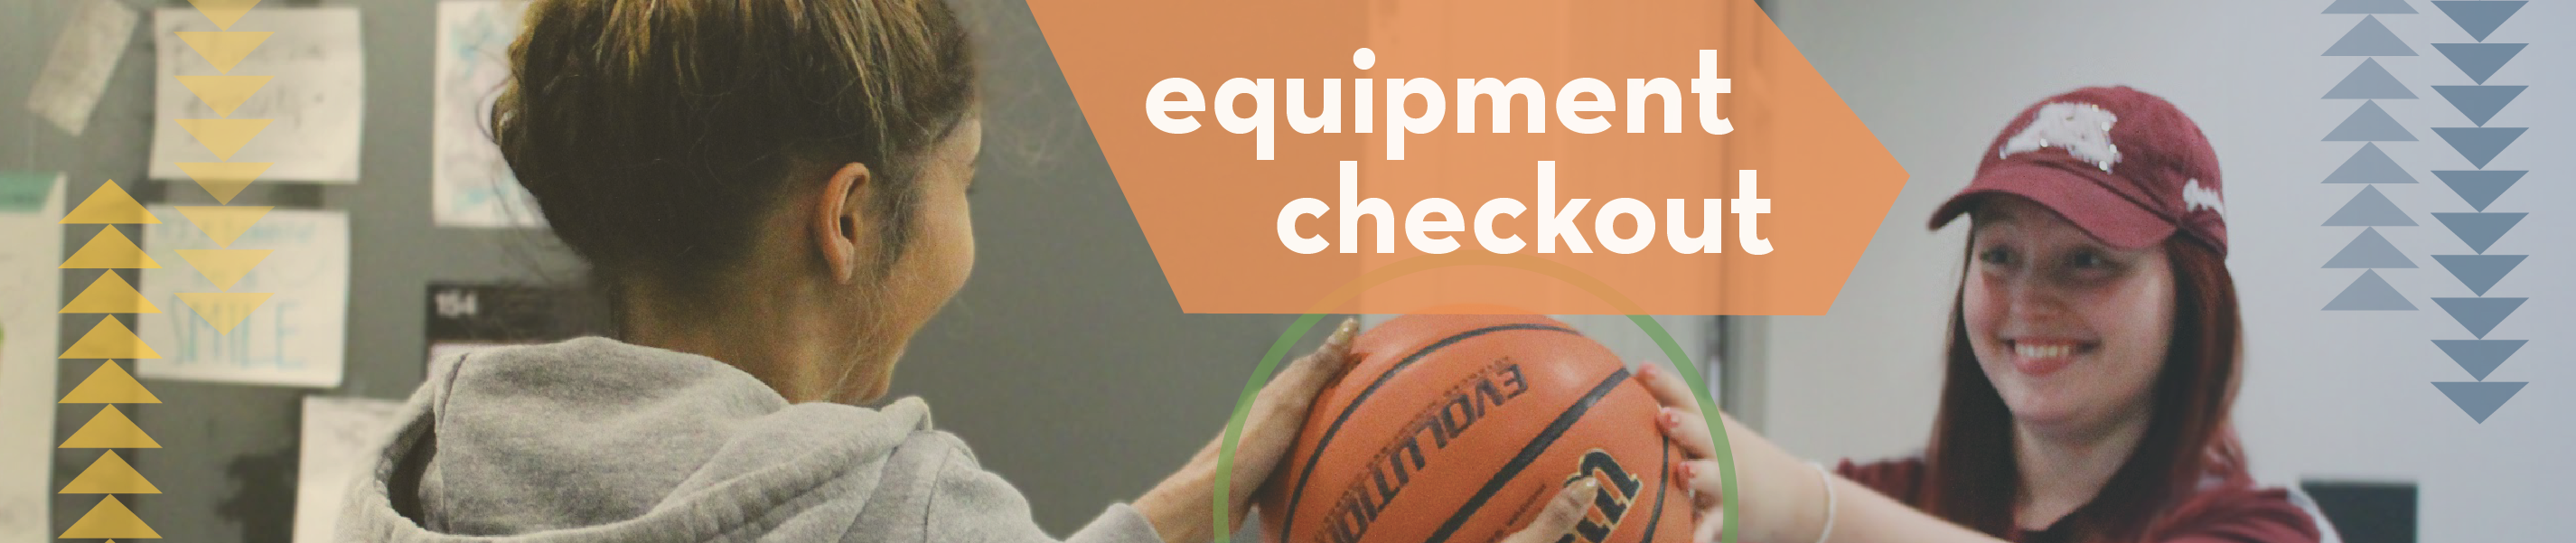 image of a student checking out a basketball from the equipment room with the header "equipment checkout"